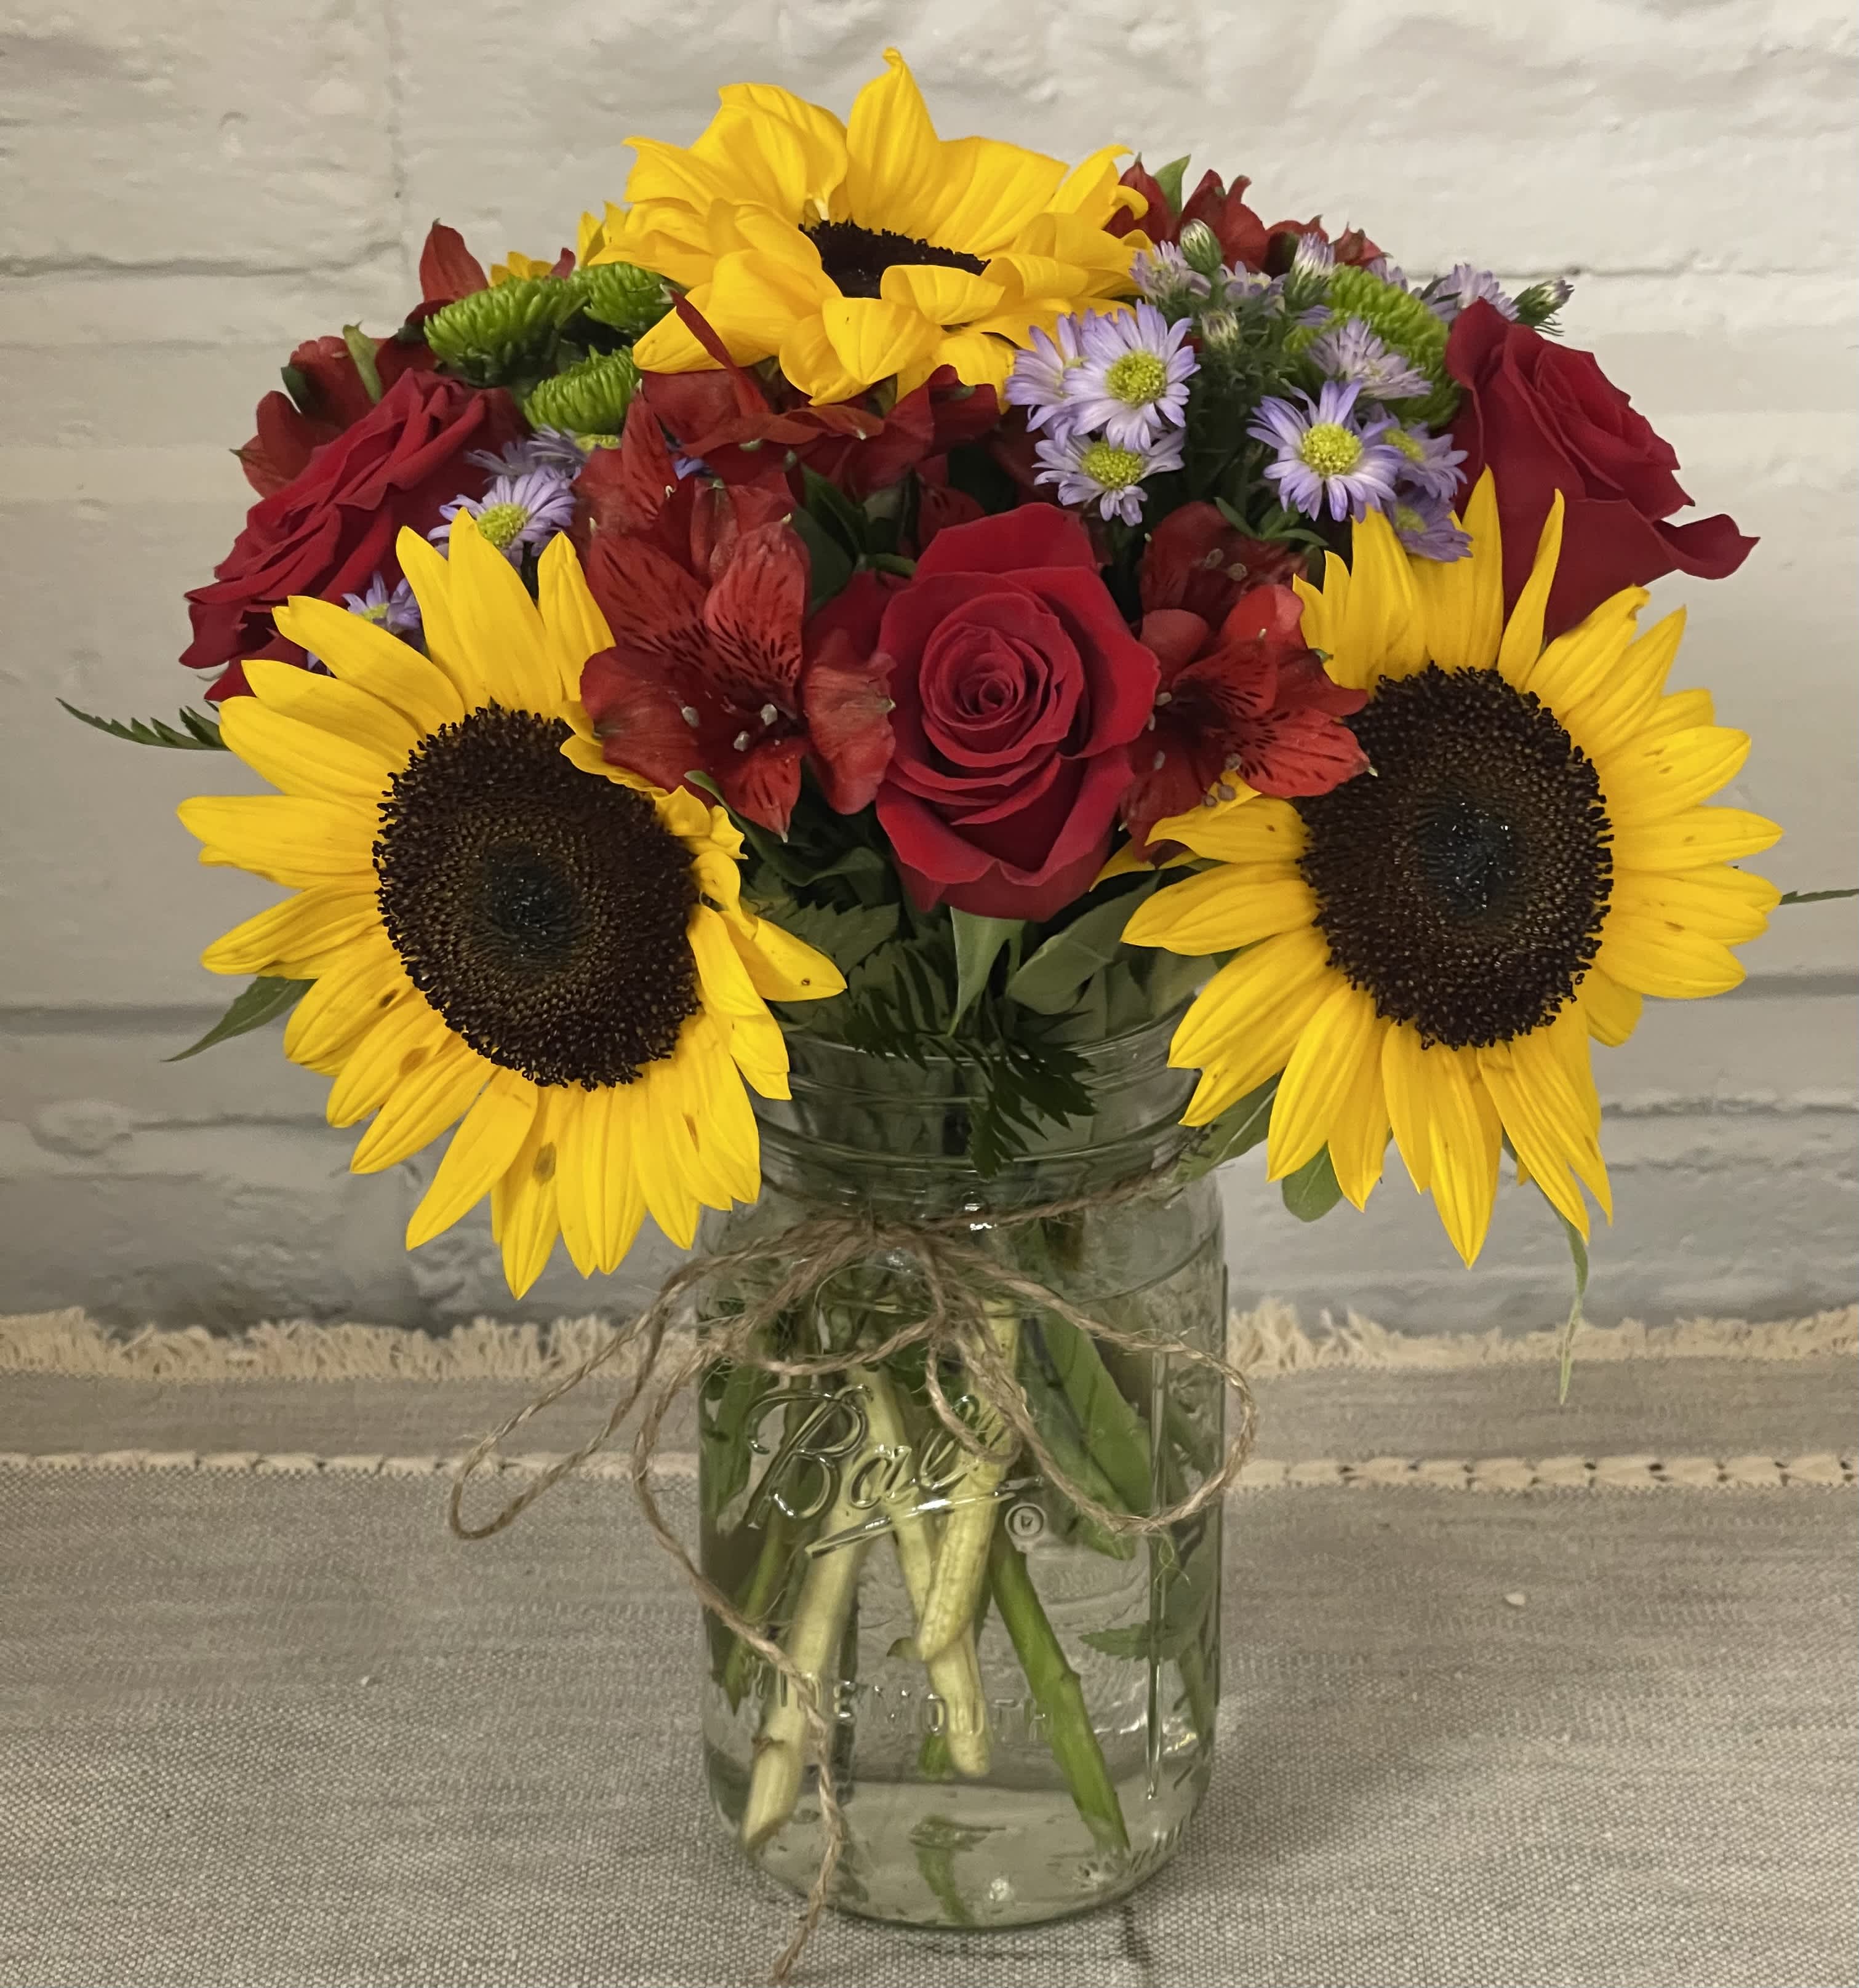 Janie's Sunshine Bouquet - This delightful arrangement that captures the essence of a sunny day in the countryside. This charming bouquet features vibrant sunflowers, symbolizing happiness and positivity, paired with elegant roses for a touch of romance. Nestled in a classic Mason jar, adorned with a rustic string tied around it for that extra country-style flair, this arrangement is perfect for adding warmth and cheer to any space.